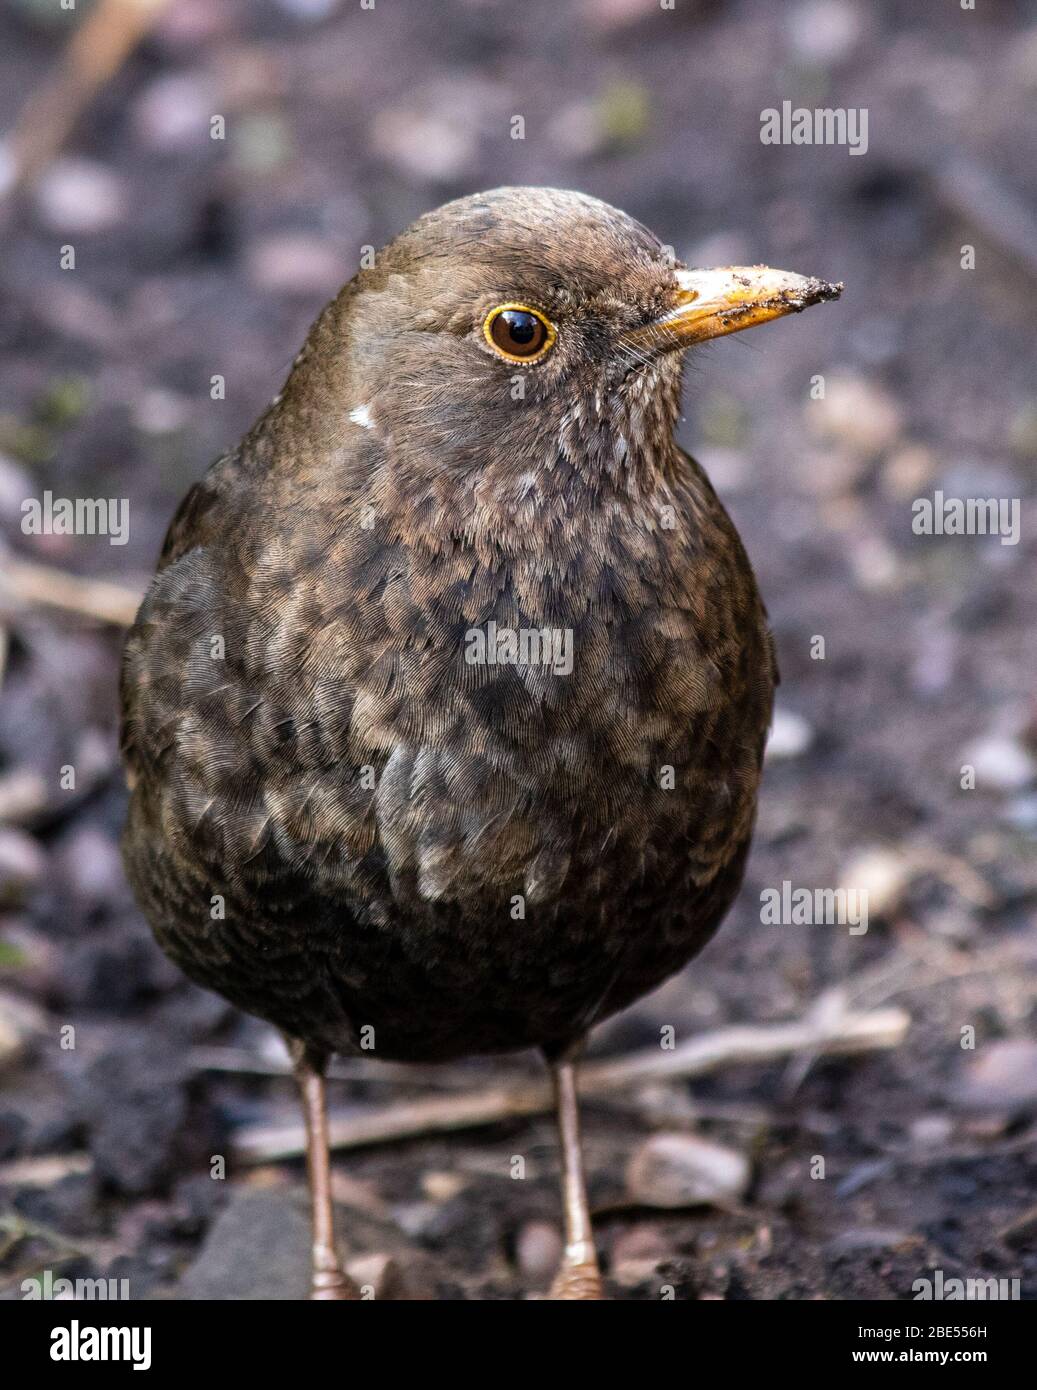 Portrait of a female blackbird standing on the floor, head cocked inquisitively looking at the camera sideways Stock Photo